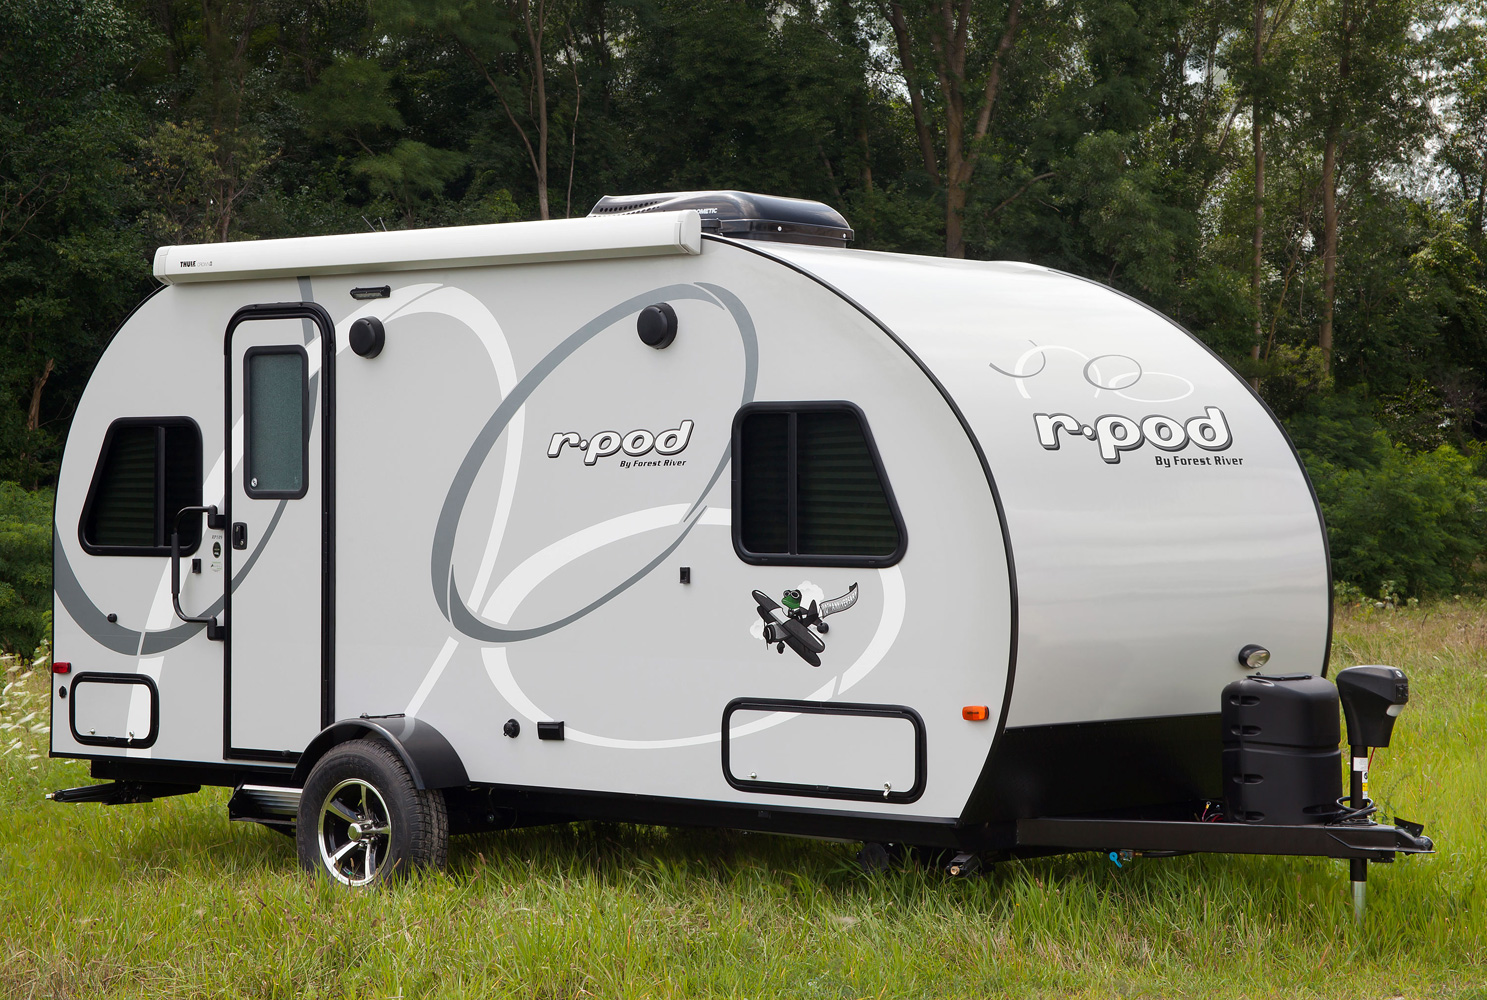 r-pod parked in a grassy campsite in the forest